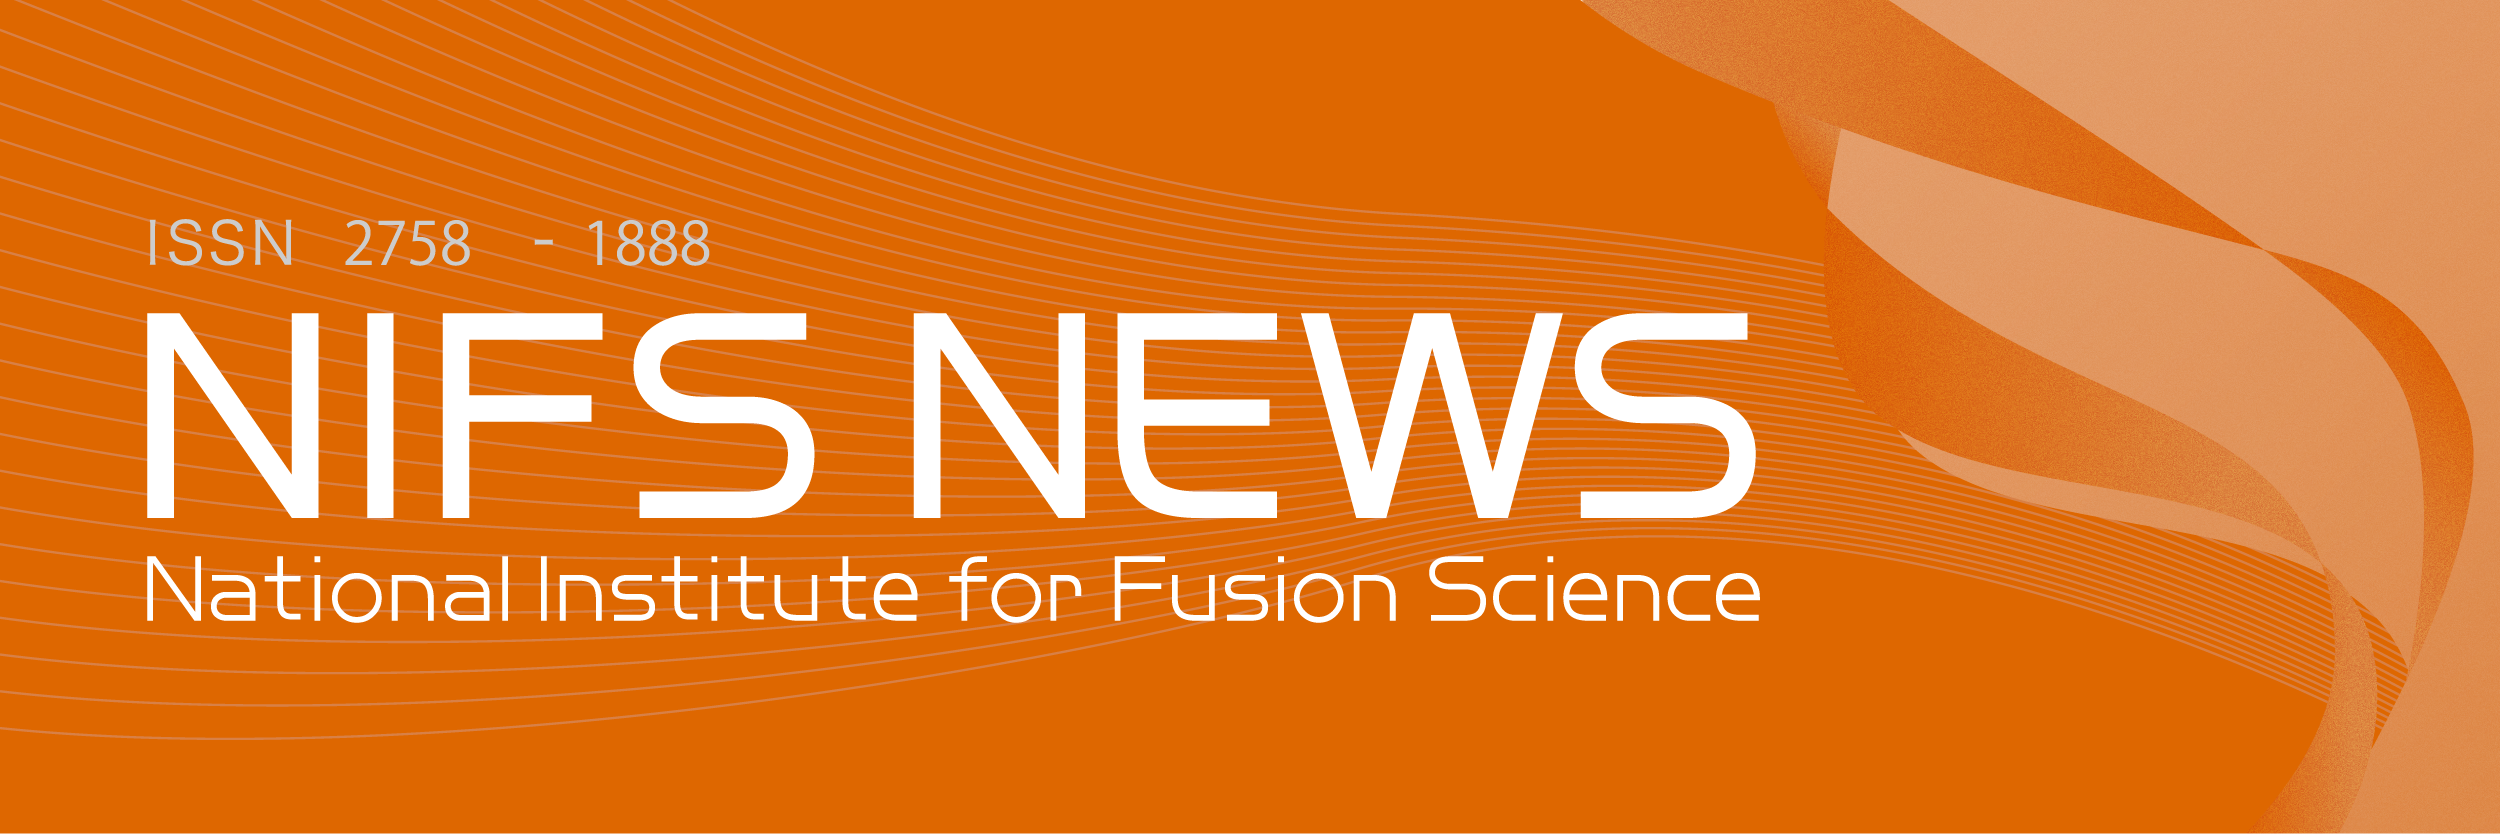 NIFS NEWS | National institute for Fusion Science